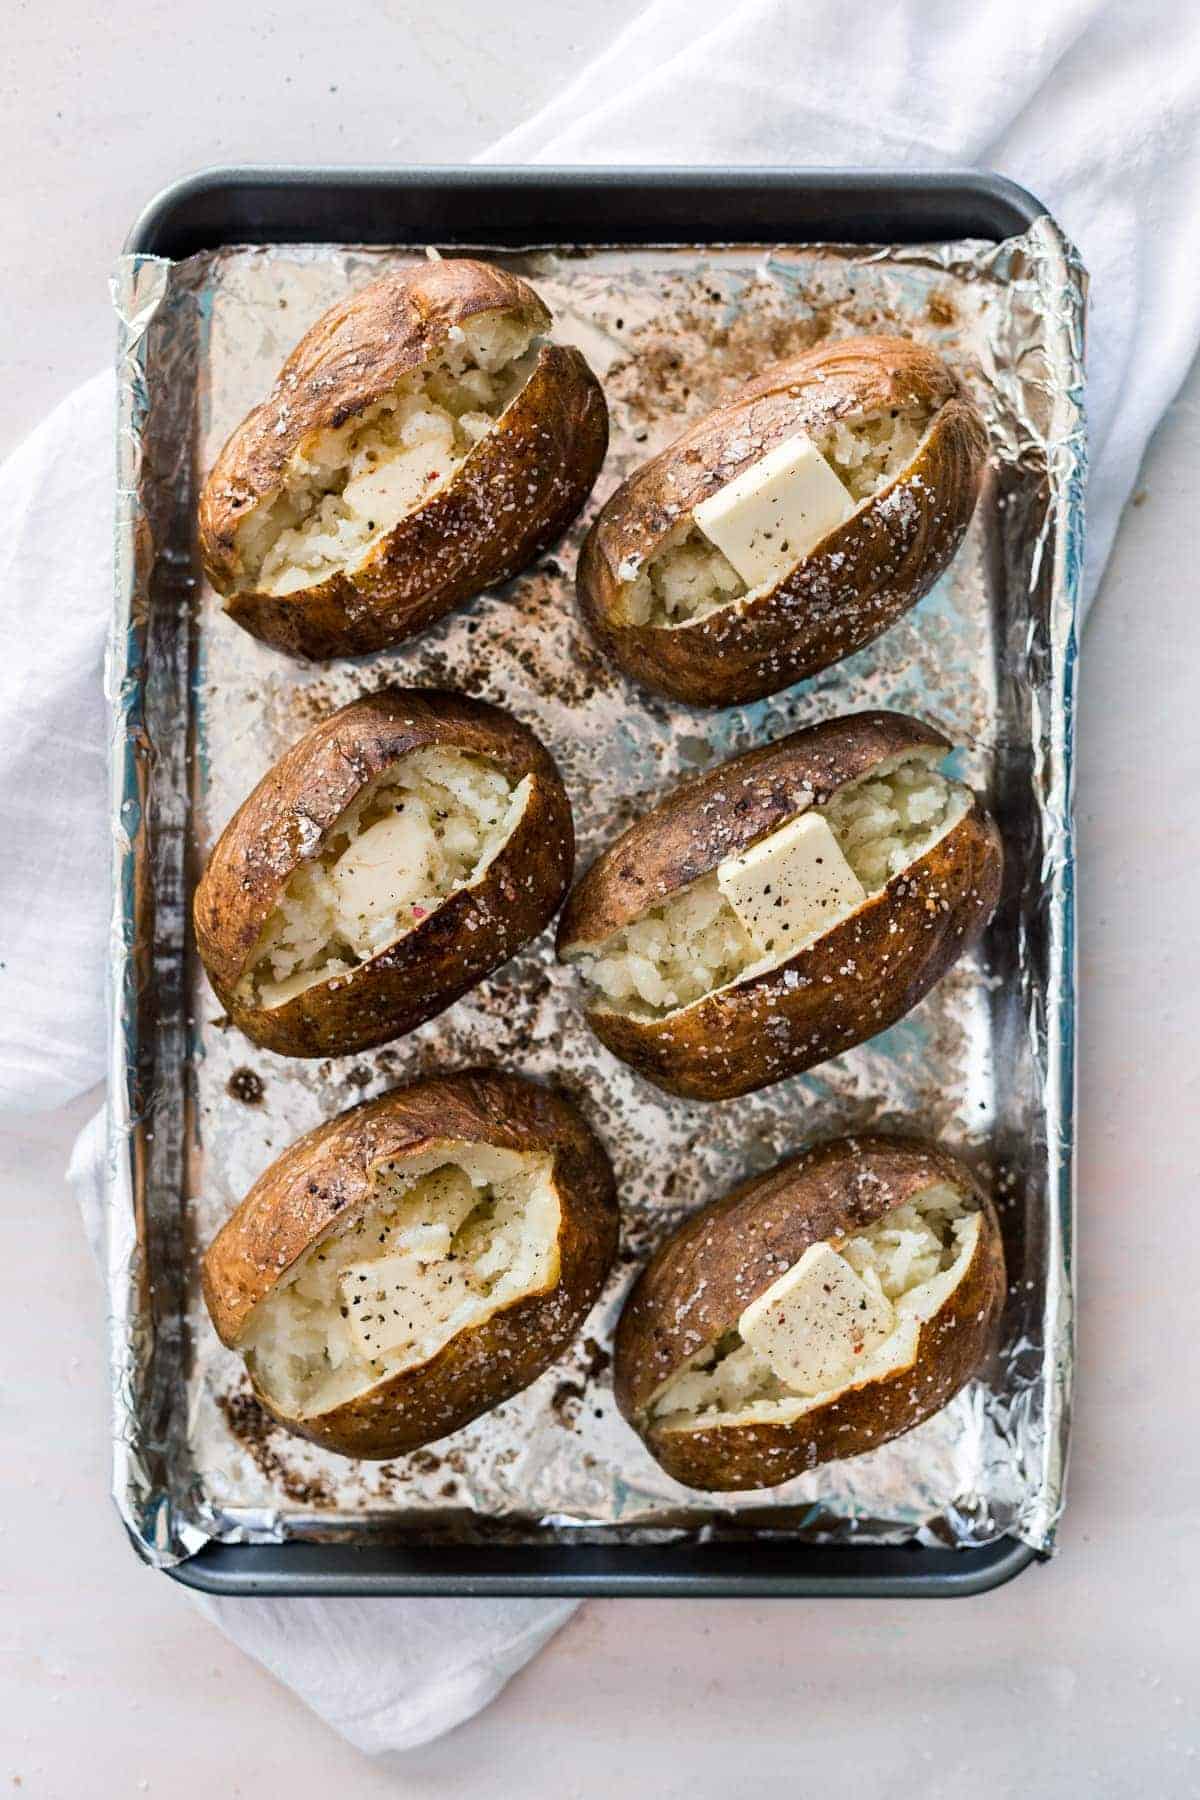 How to Bake a Potato | The Secret to Perfectly Baked Potatoes